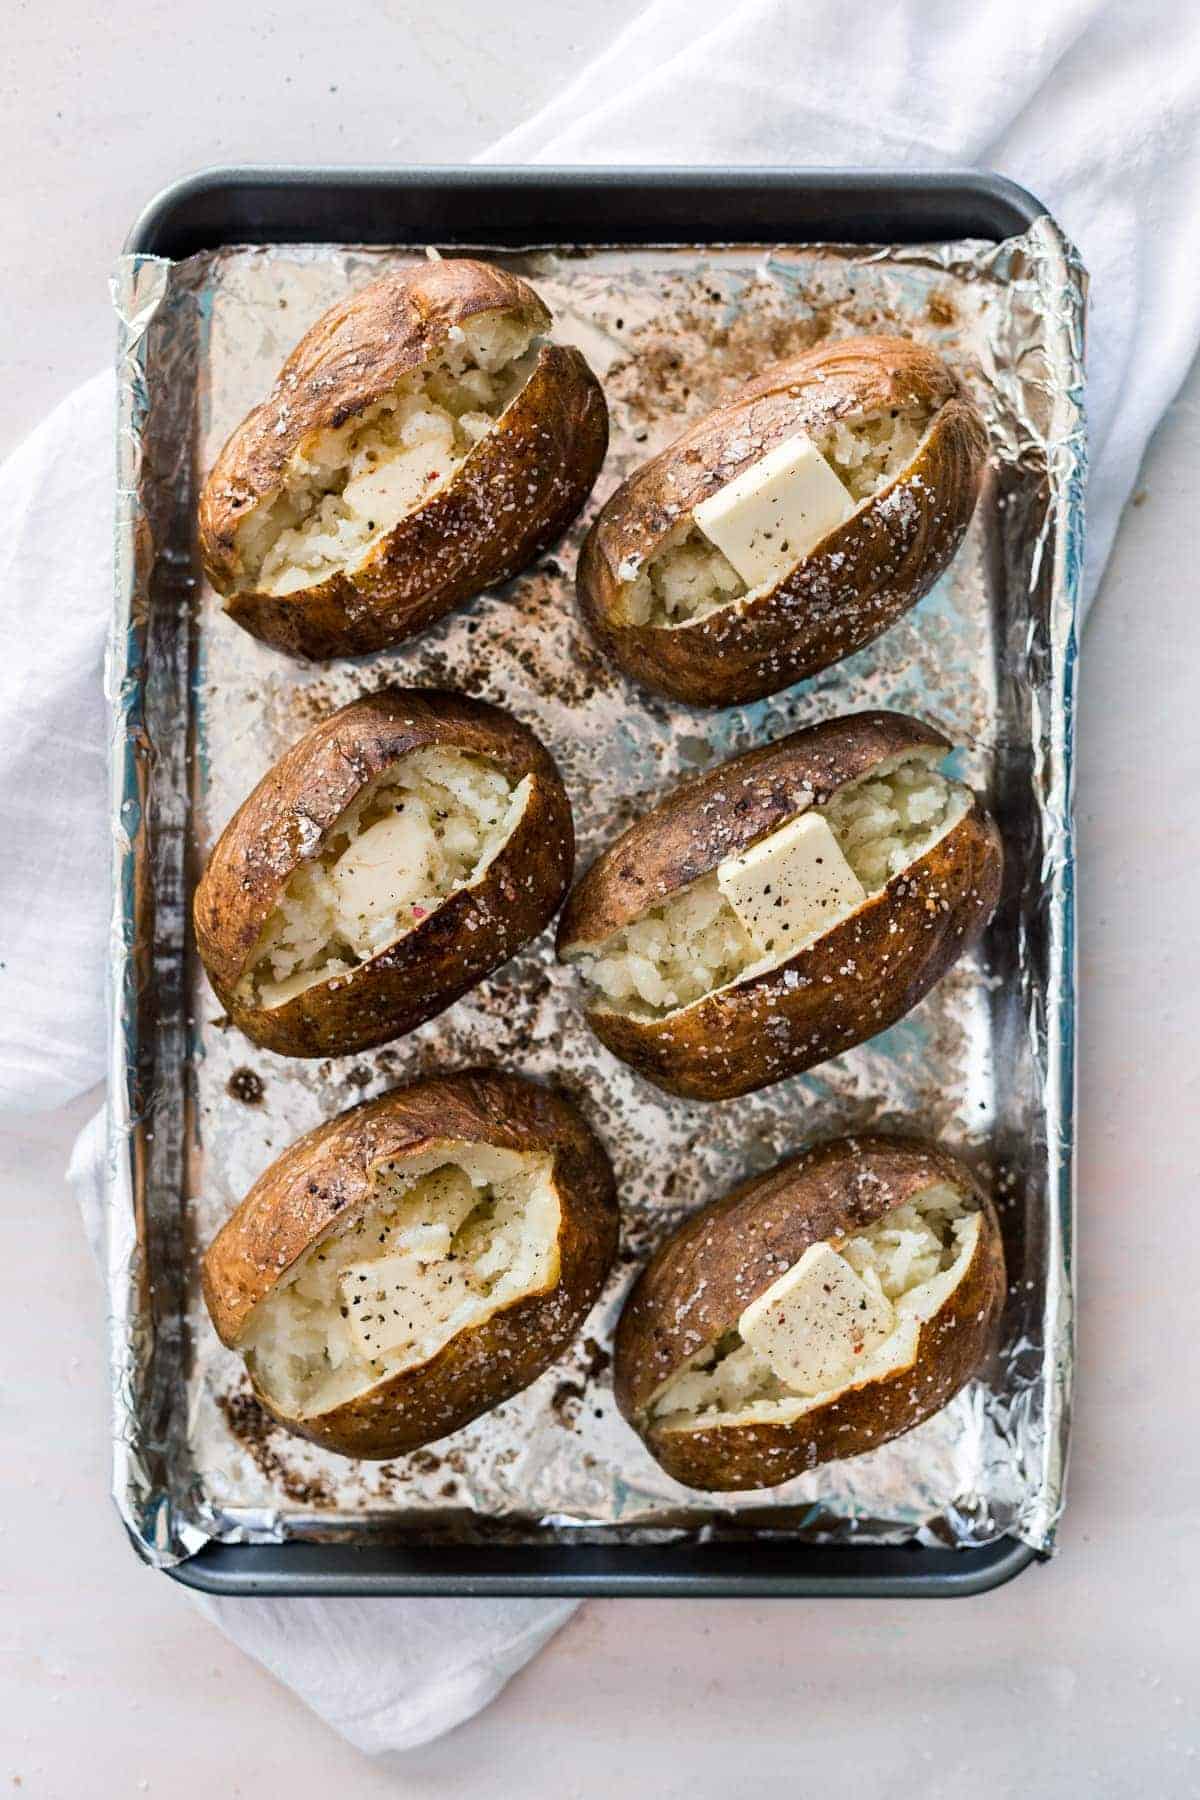 How to Bake a Potato | The Secret to Perfectly Baked Potatoes